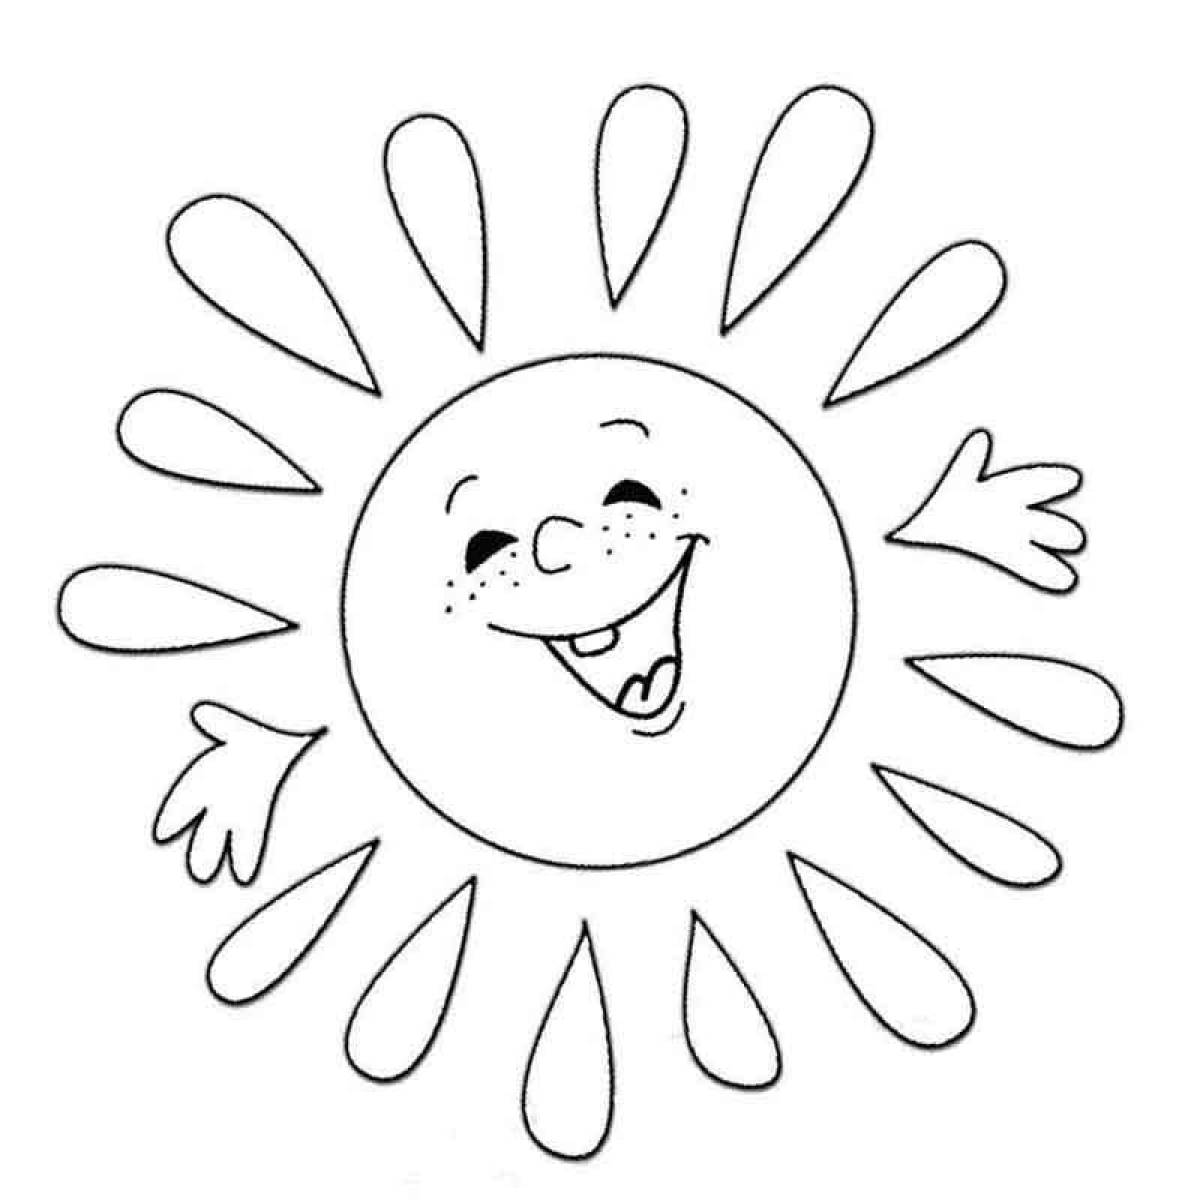 Shining sun coloring book for kids